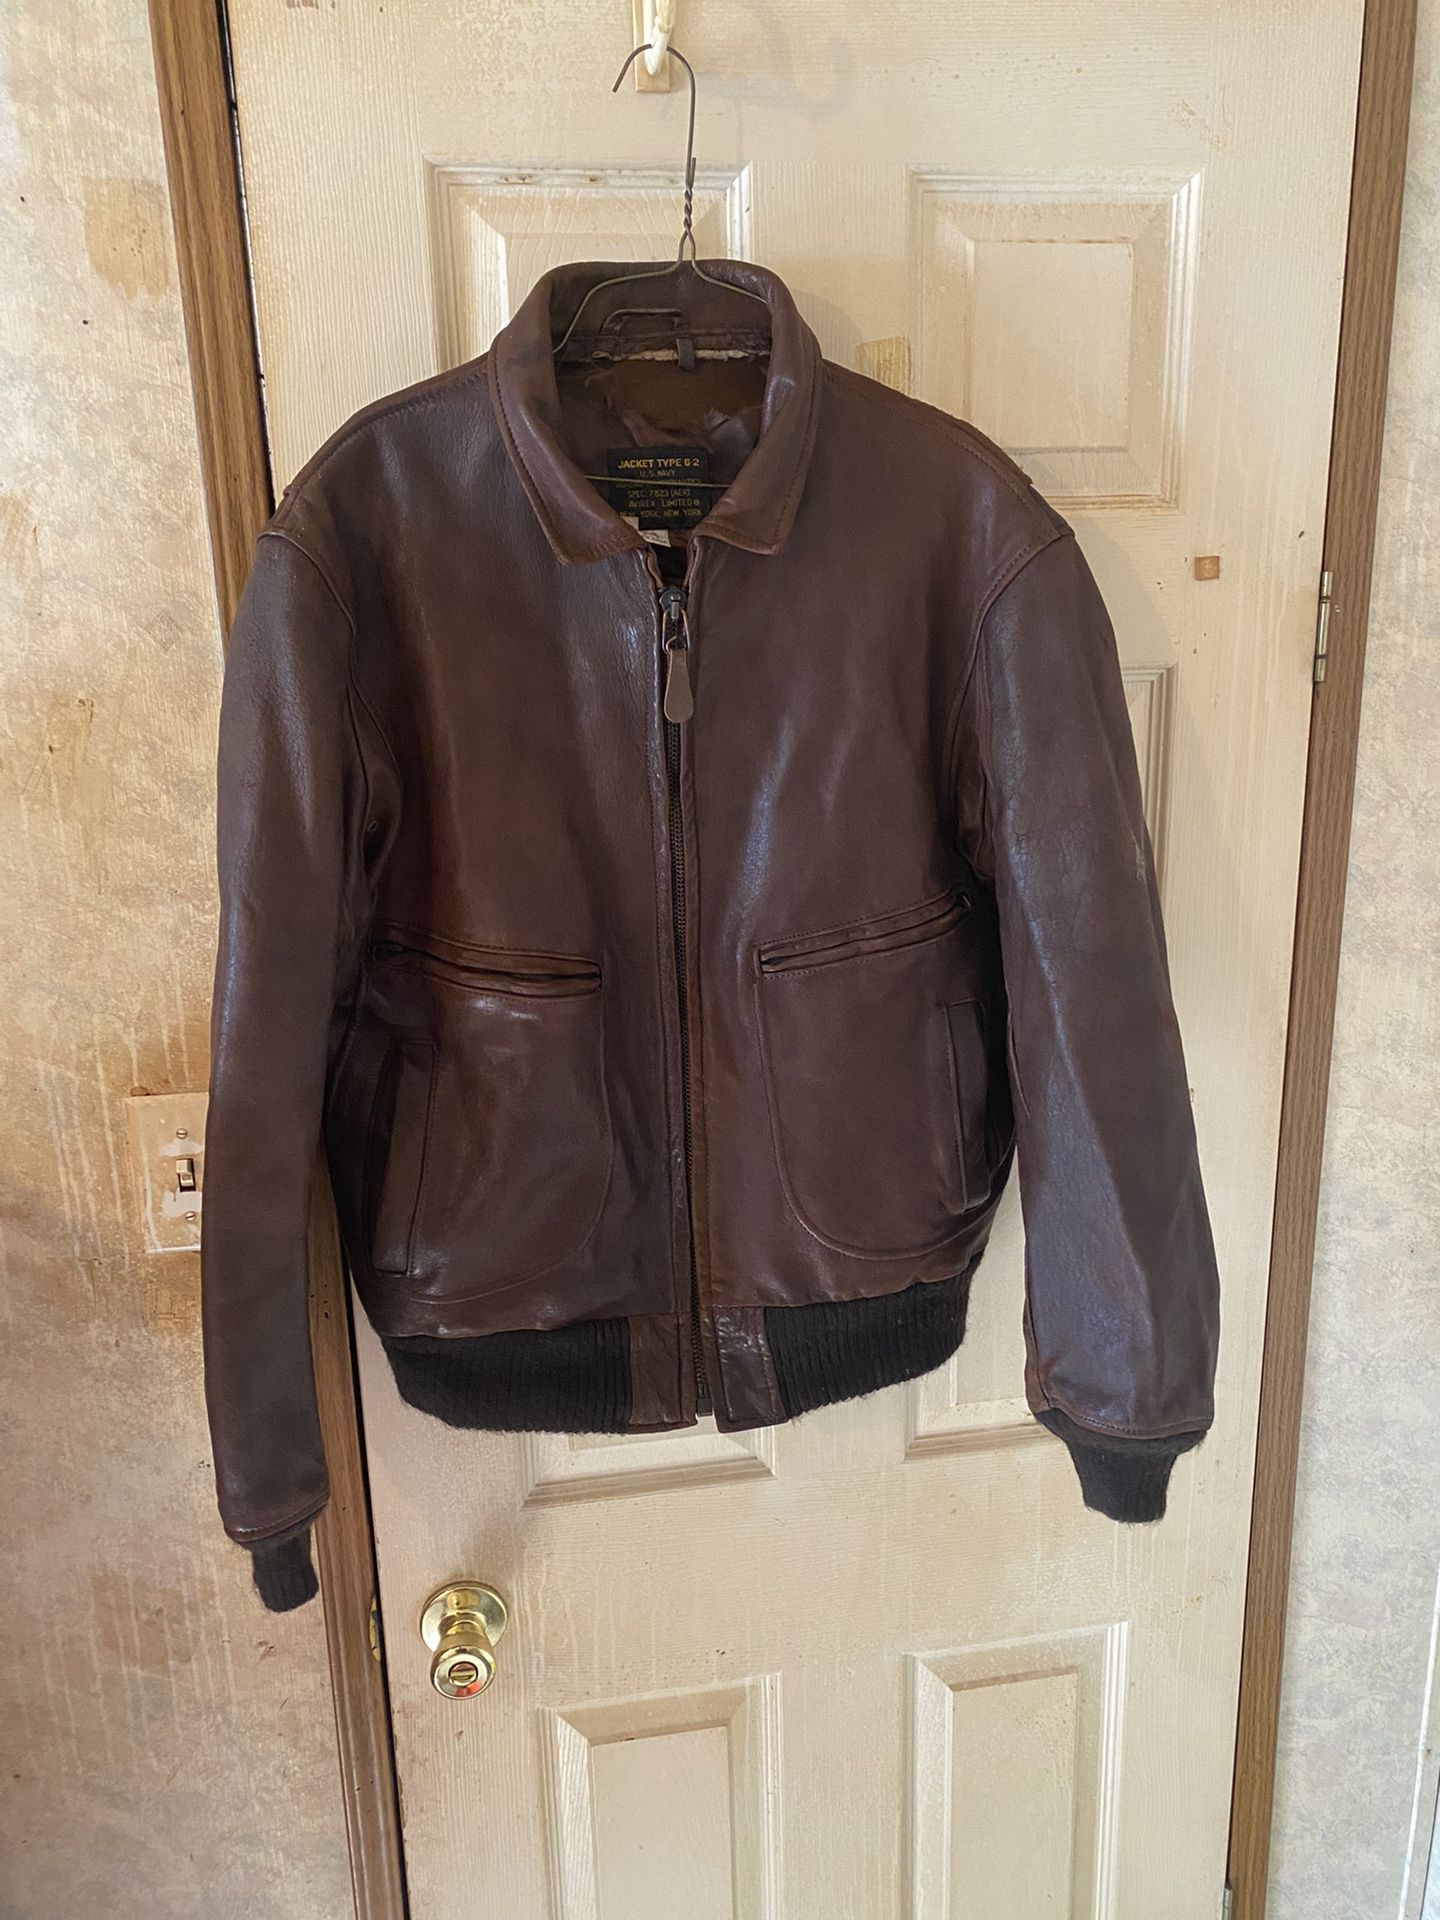 Vintage Avirex US Navy Bombers Leather Jacket Type G-2 Size 42 Brown